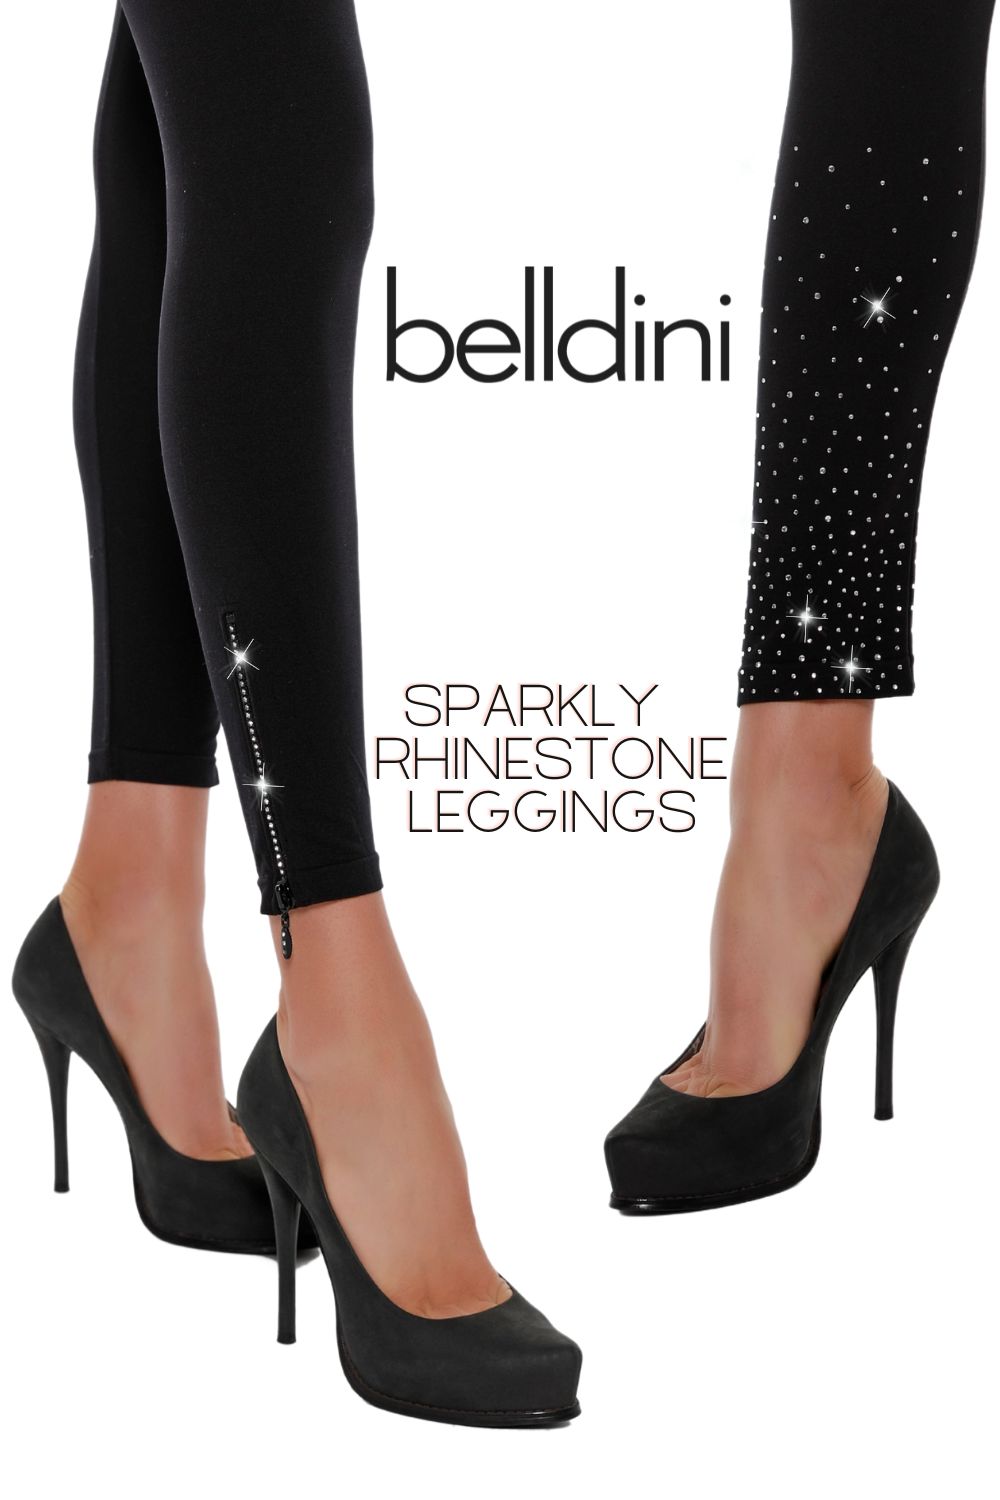 Women's Seamless Fashion Leggings with Scattered Rhinestones around the Lower Calf